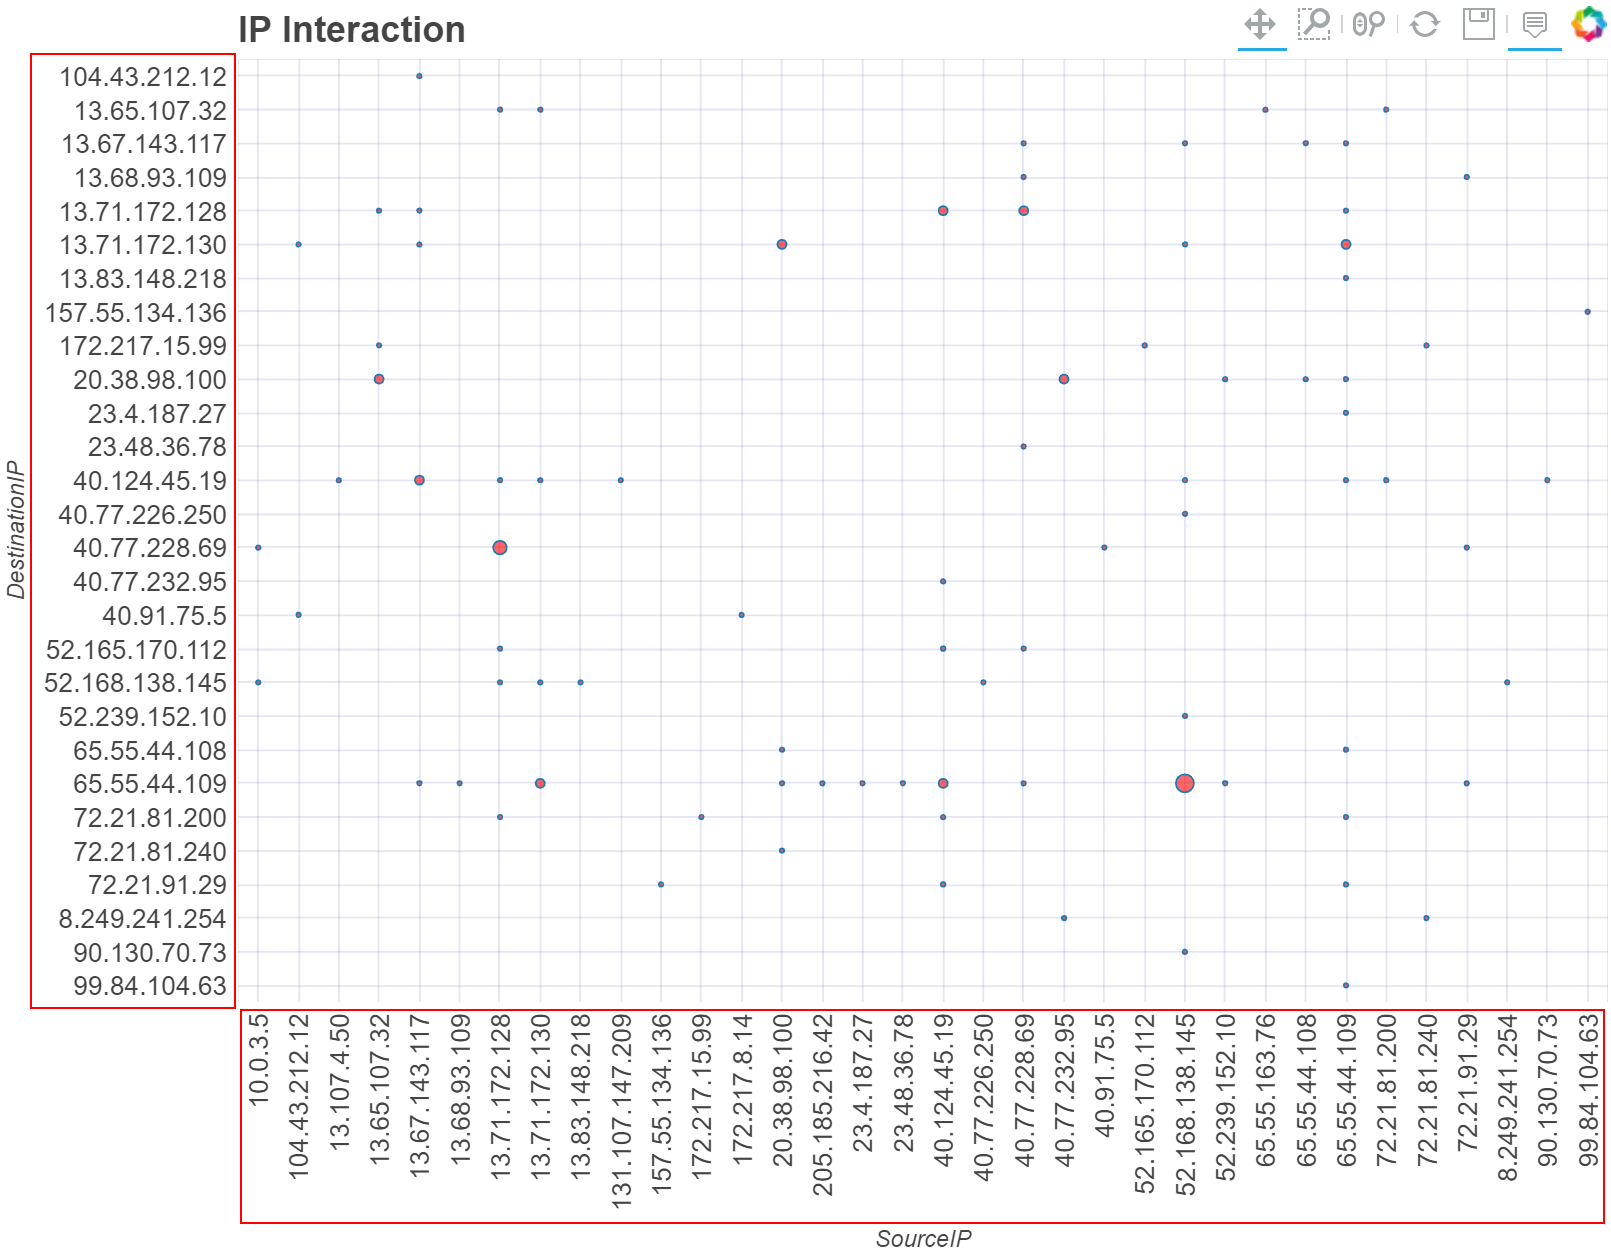 Plot of simple count of interactions between source and destination IP addresses, showing sorted values on both axes.